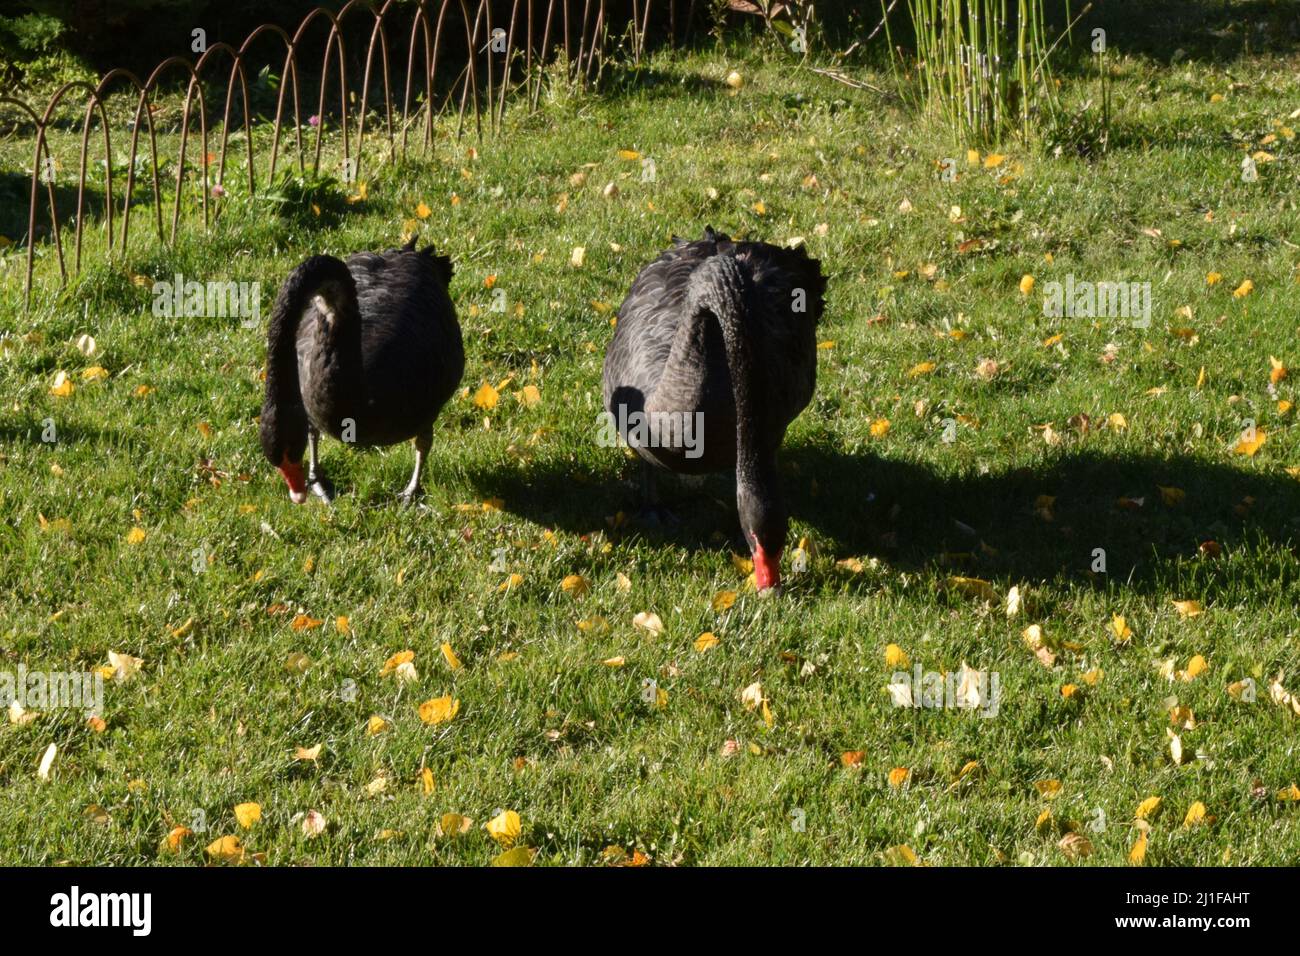 Couple of beautiful Black swans walking on the green grass. Stock Photo